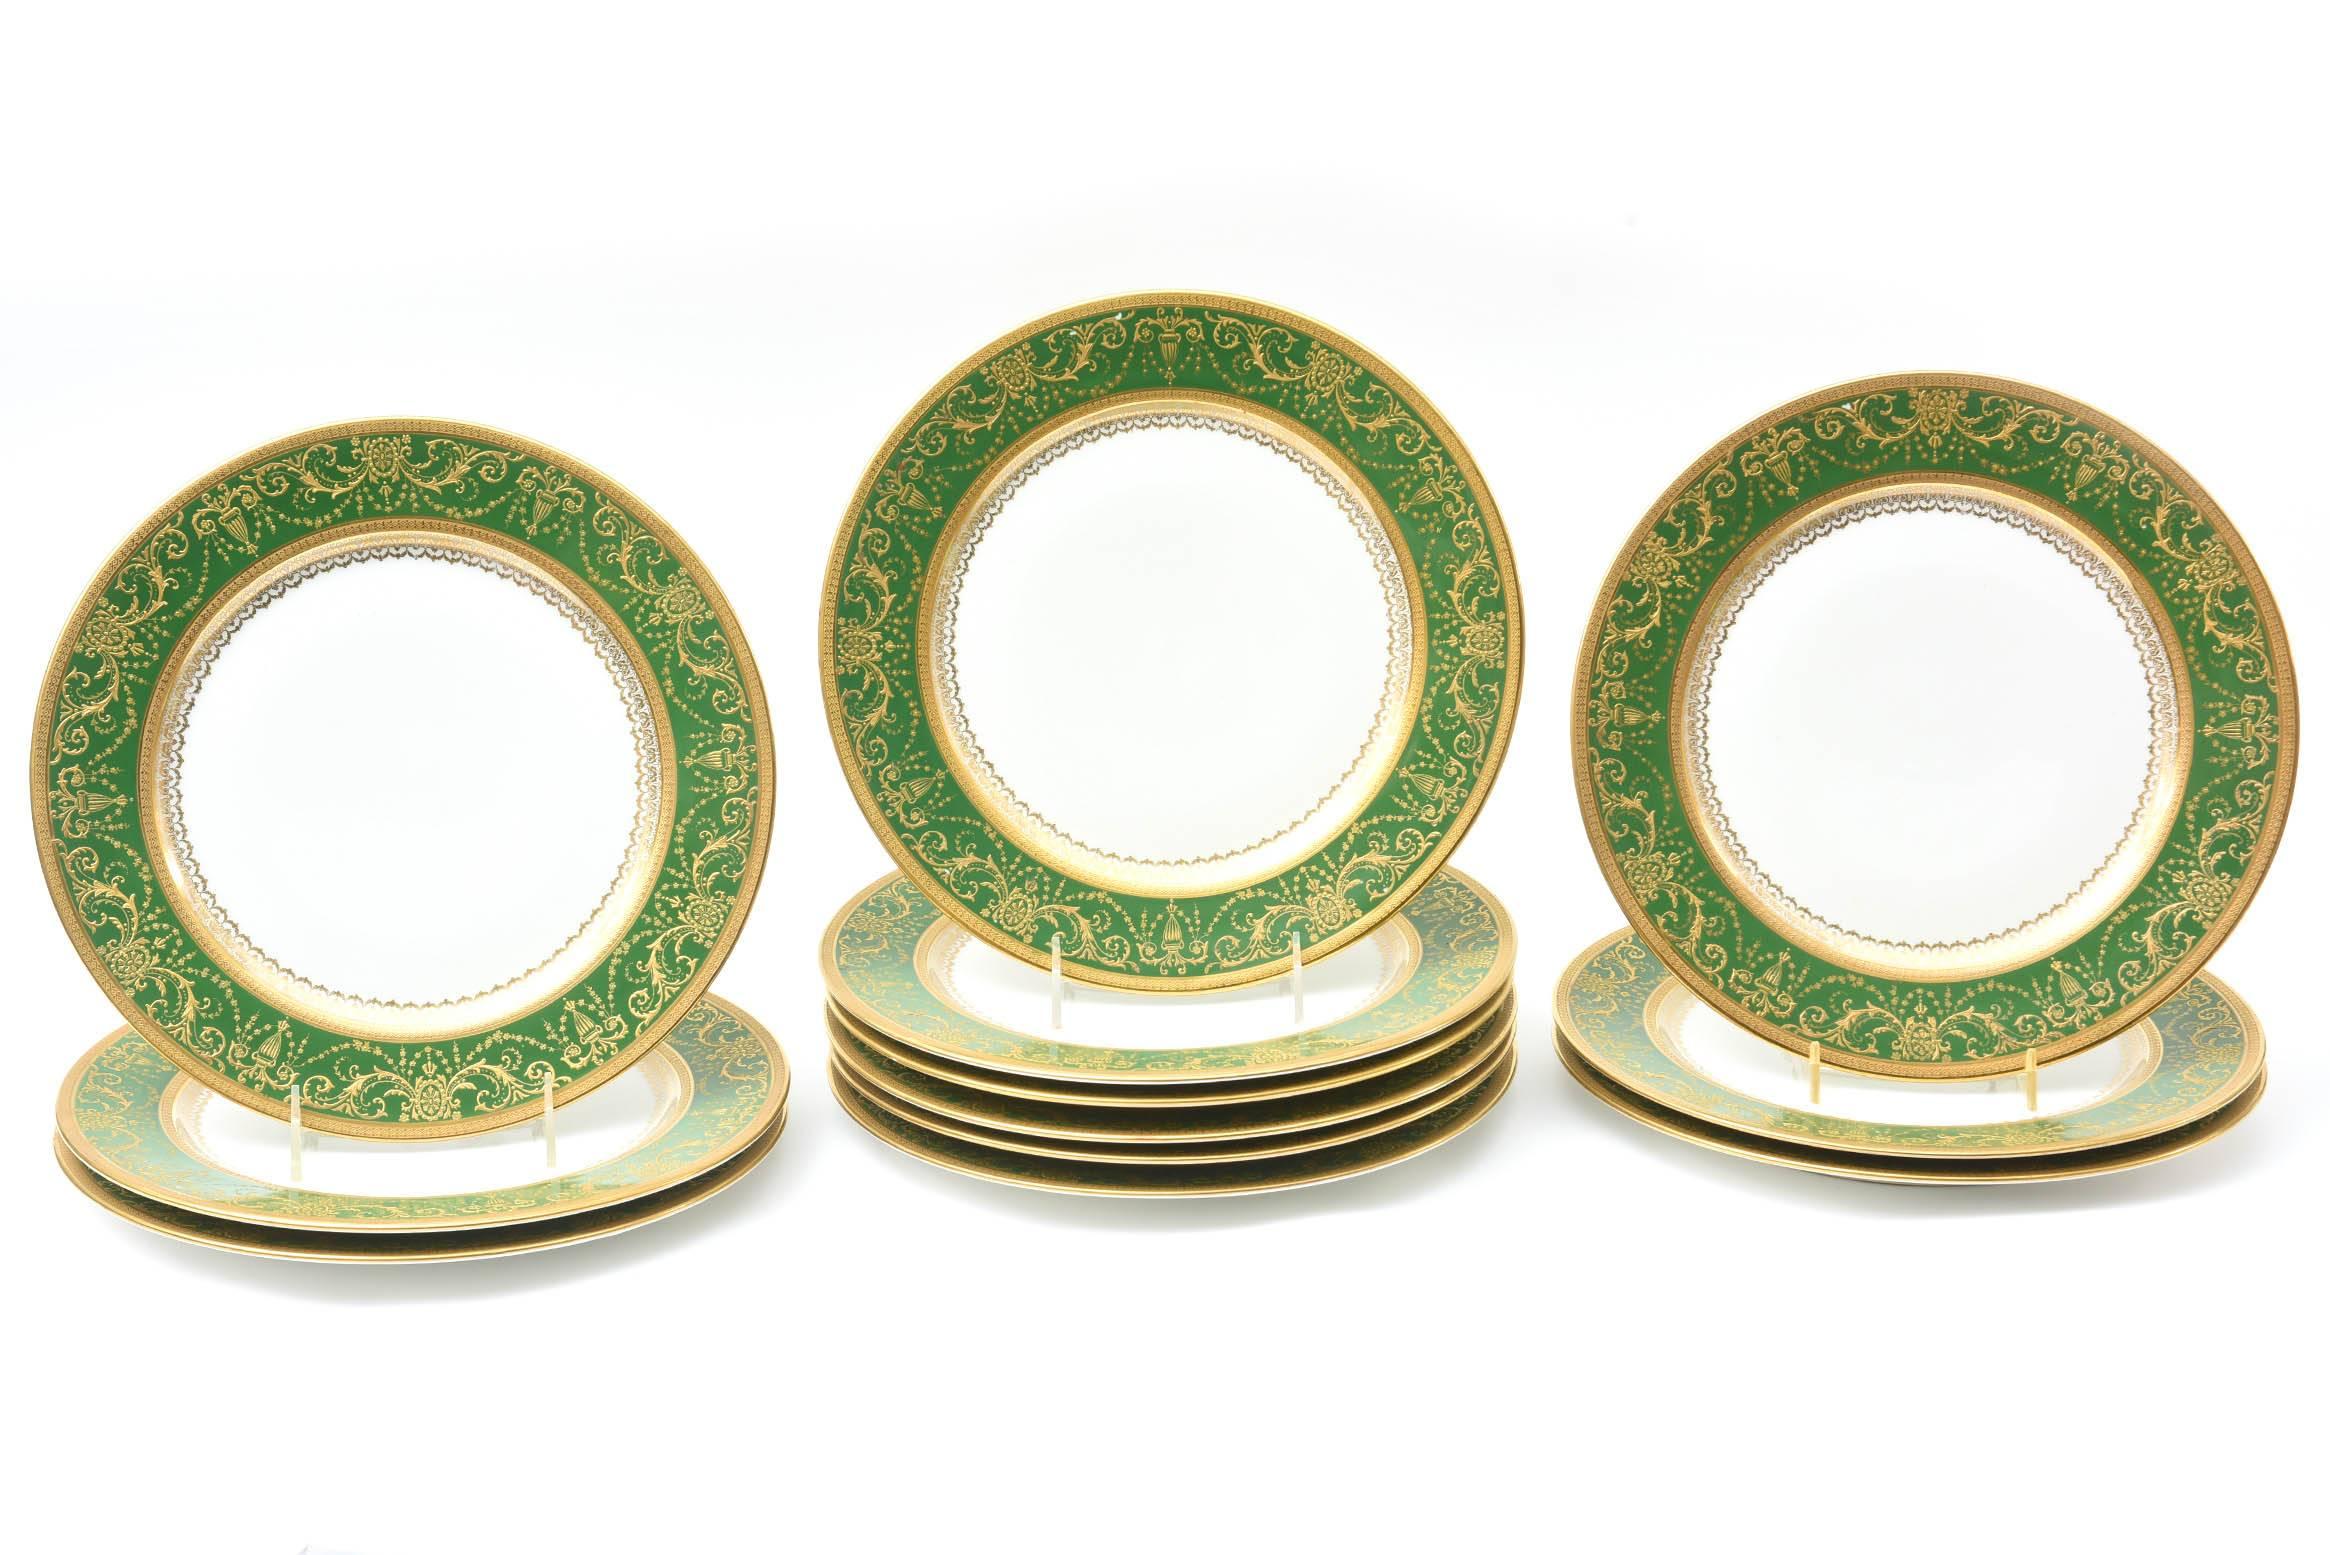 A gorgeous color of rich emerald green dinner plates by the storied Limoges Factory of William Guerin. Finely raised paste gilding is set upon a collar of dark green. A nice clean and crisp white center. These dinner plates are just a little bit